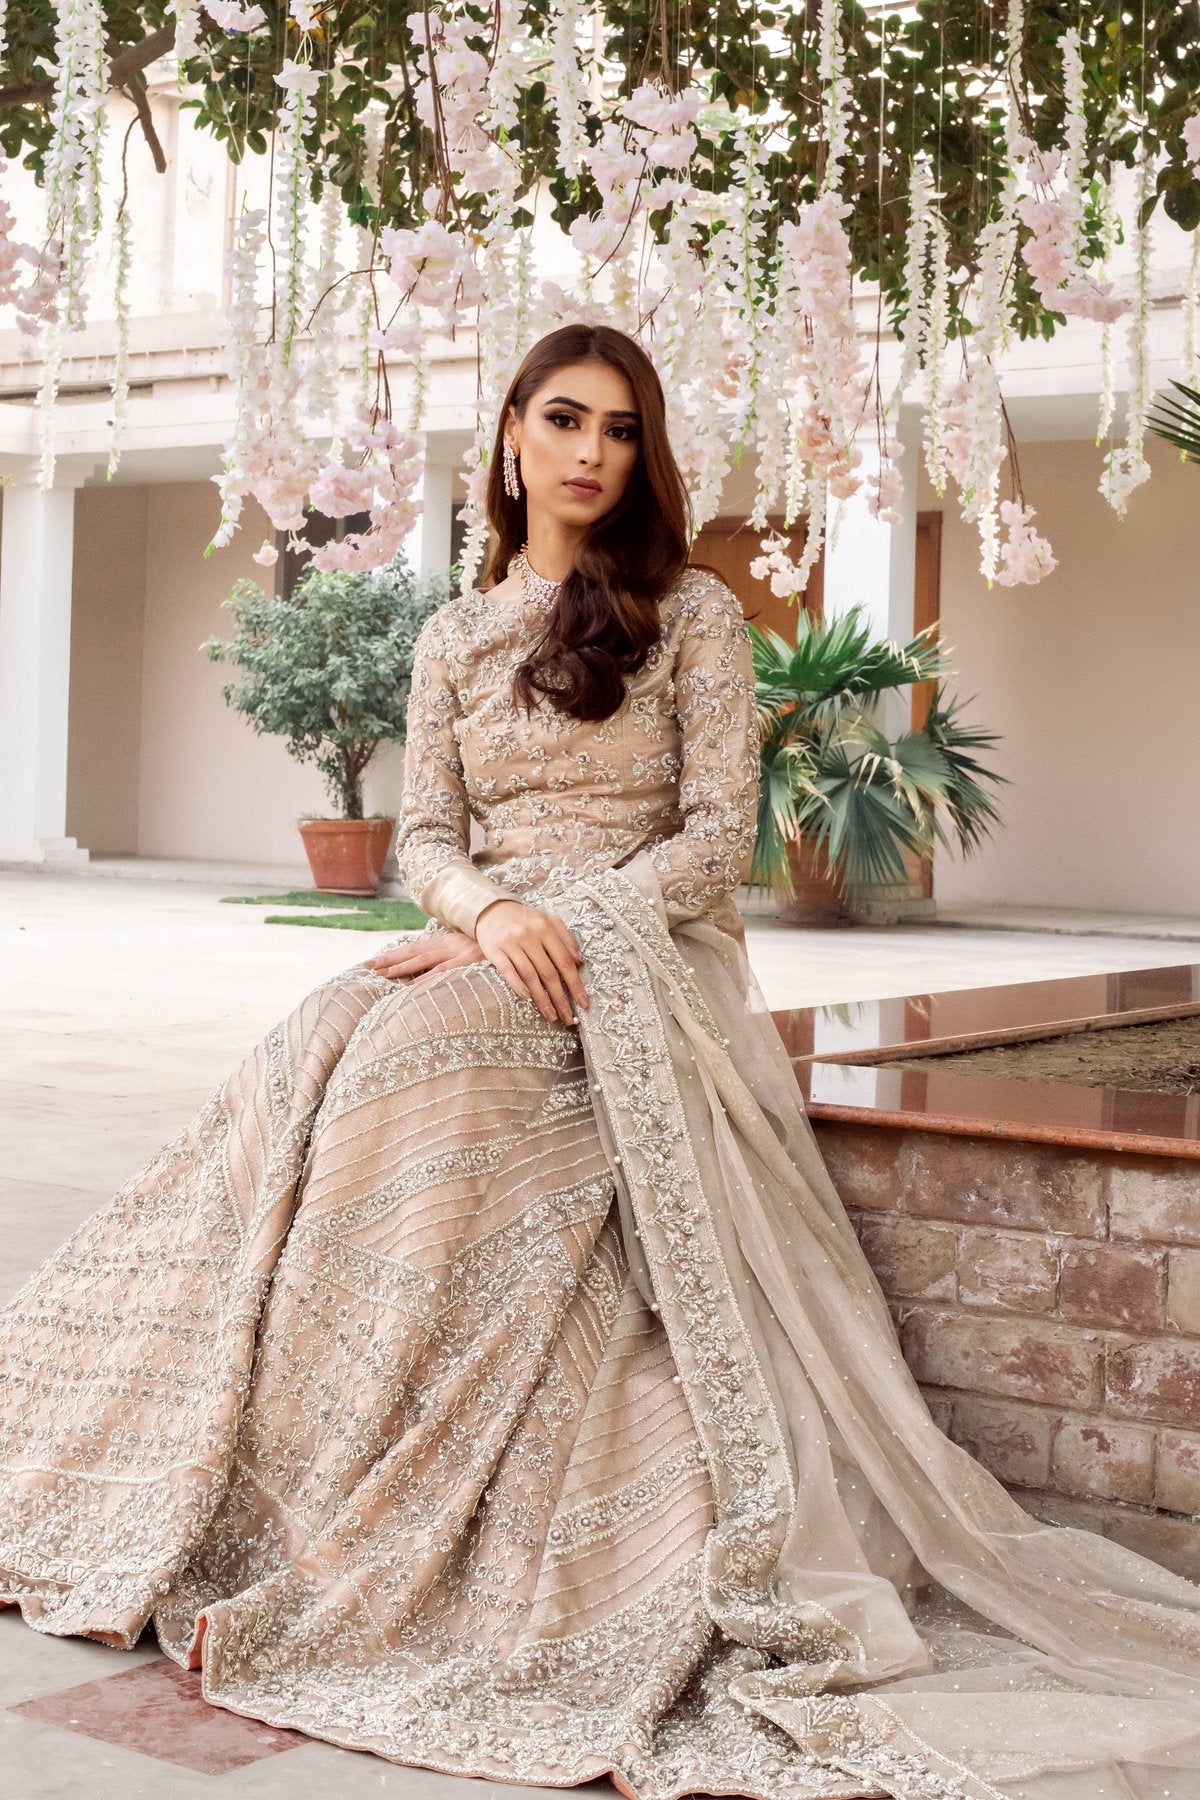 Peach Colour Lehenga - Peach Lehenga Trend For wedding occasion - G3+ Fashion - The shades may vary slightly from the colors displayed on your screen.